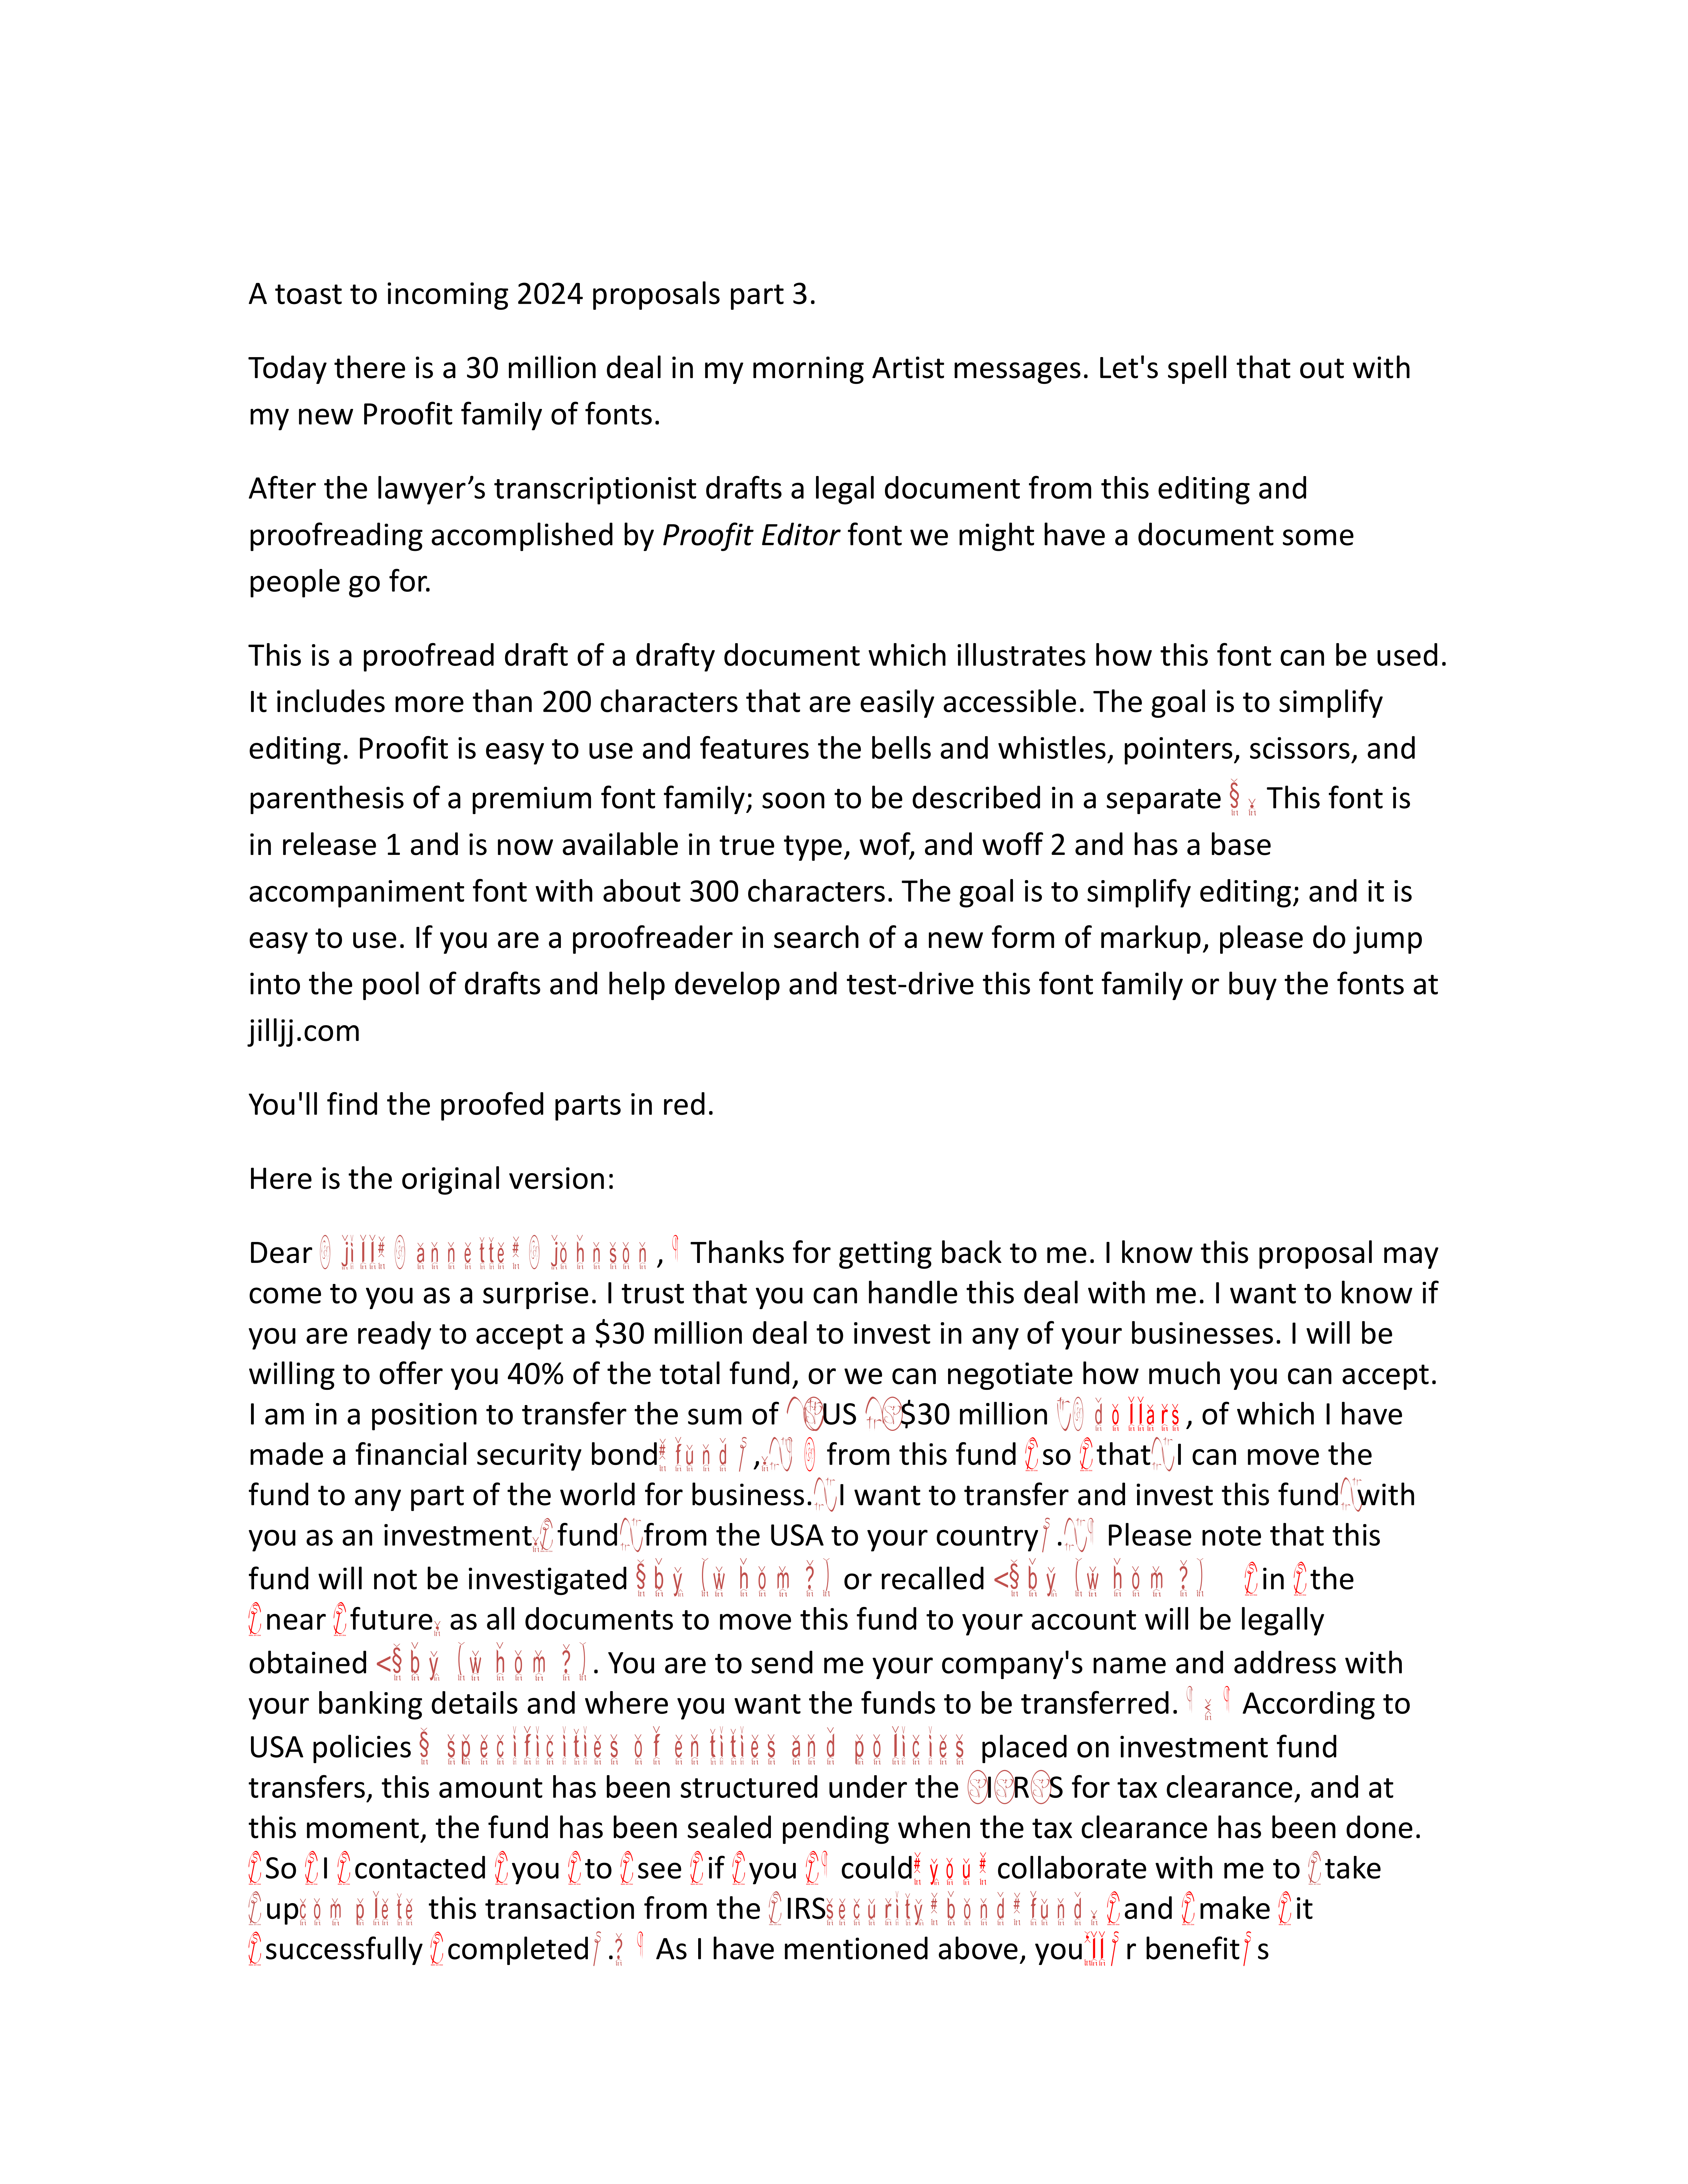 Proofit proofreading font proposal page 1